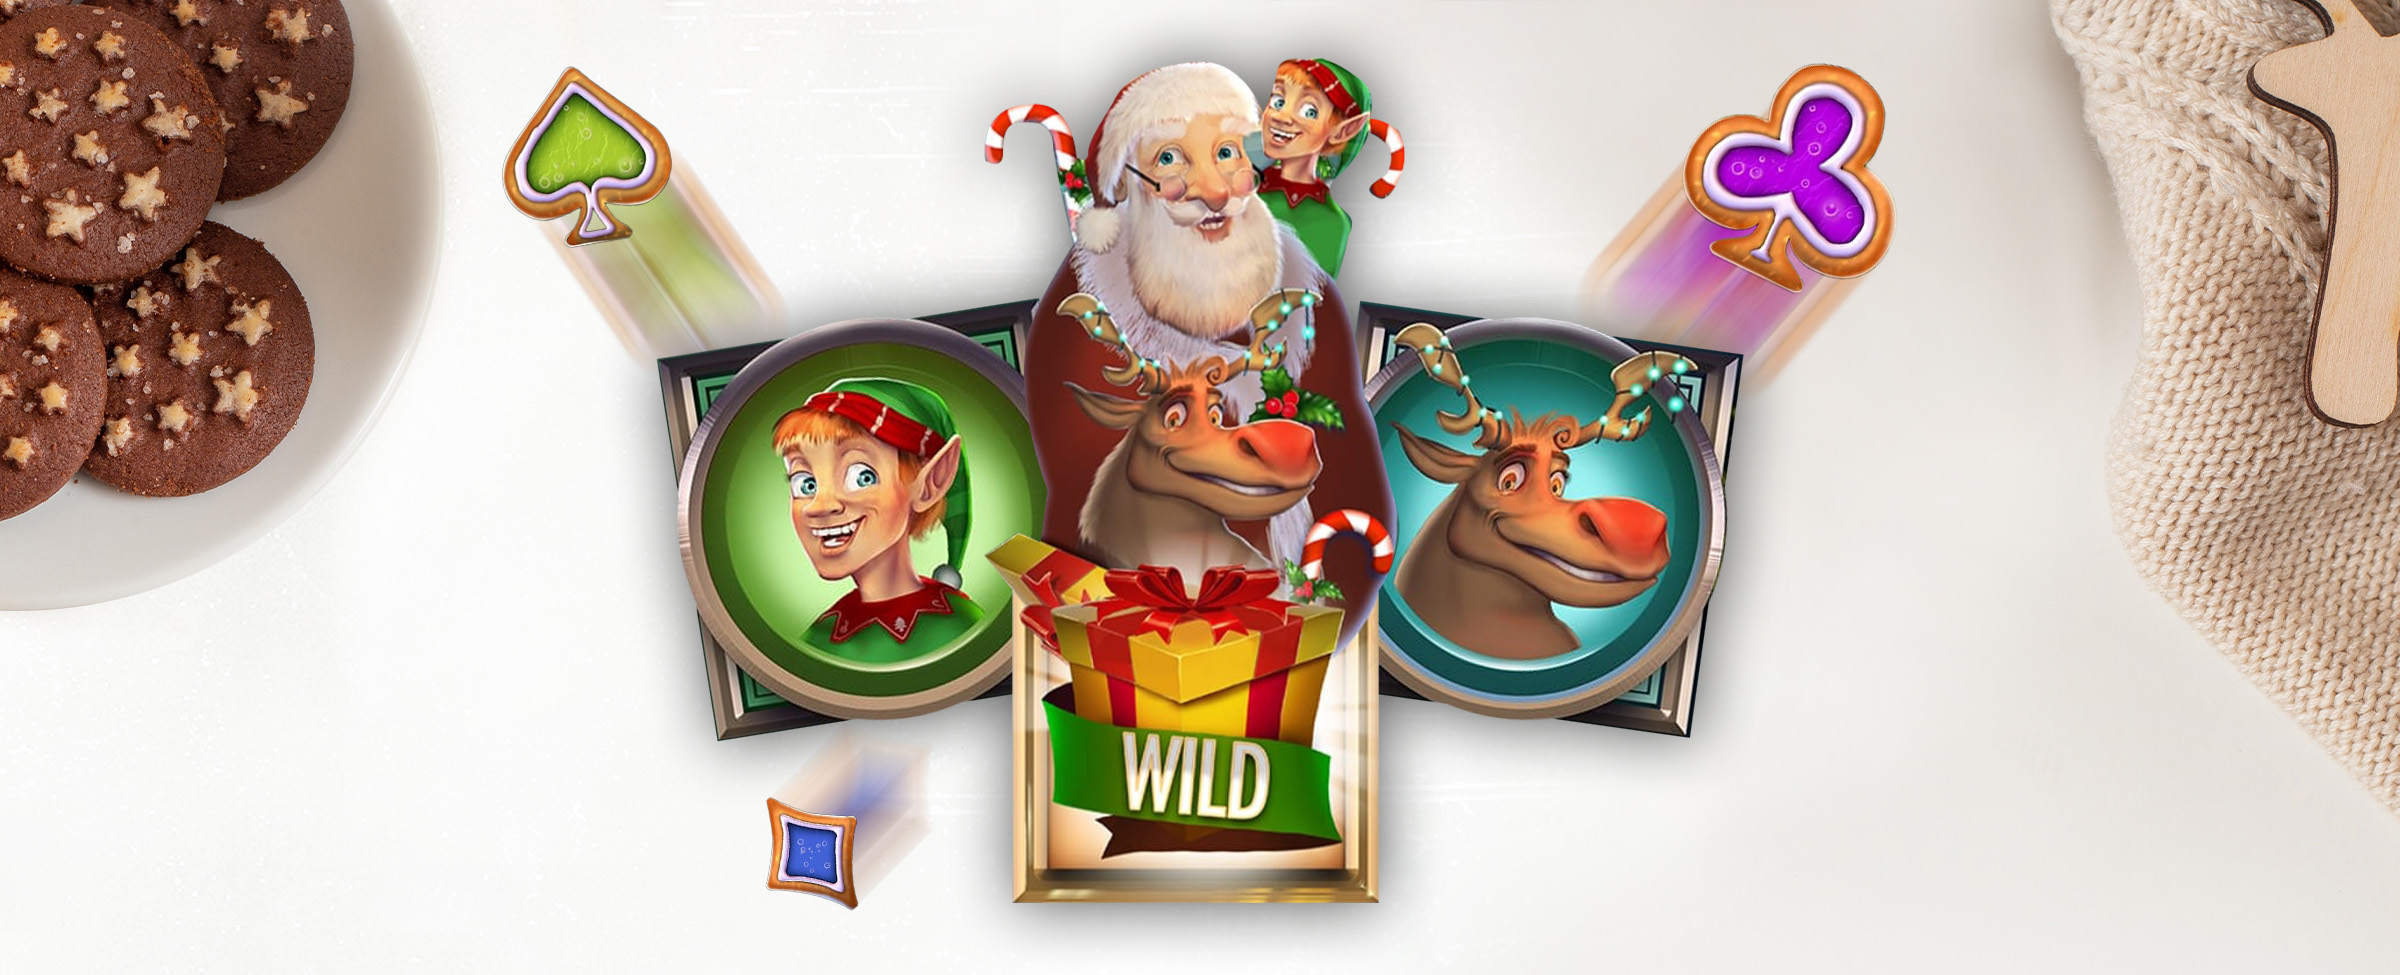 3D animations from the Cafe Casino slot game Santa’s Ways Hot Drop Jackpots are seen in the middle of the image, featuring an elf, a reindeer, and a yellow gift box wrapped in a green ribbon with the word “wild”, with a reindeer, Santa Claus and an elf blooming out from the center. Either side, there are chocolate cookies on a plate, and a beige knitted sweater.